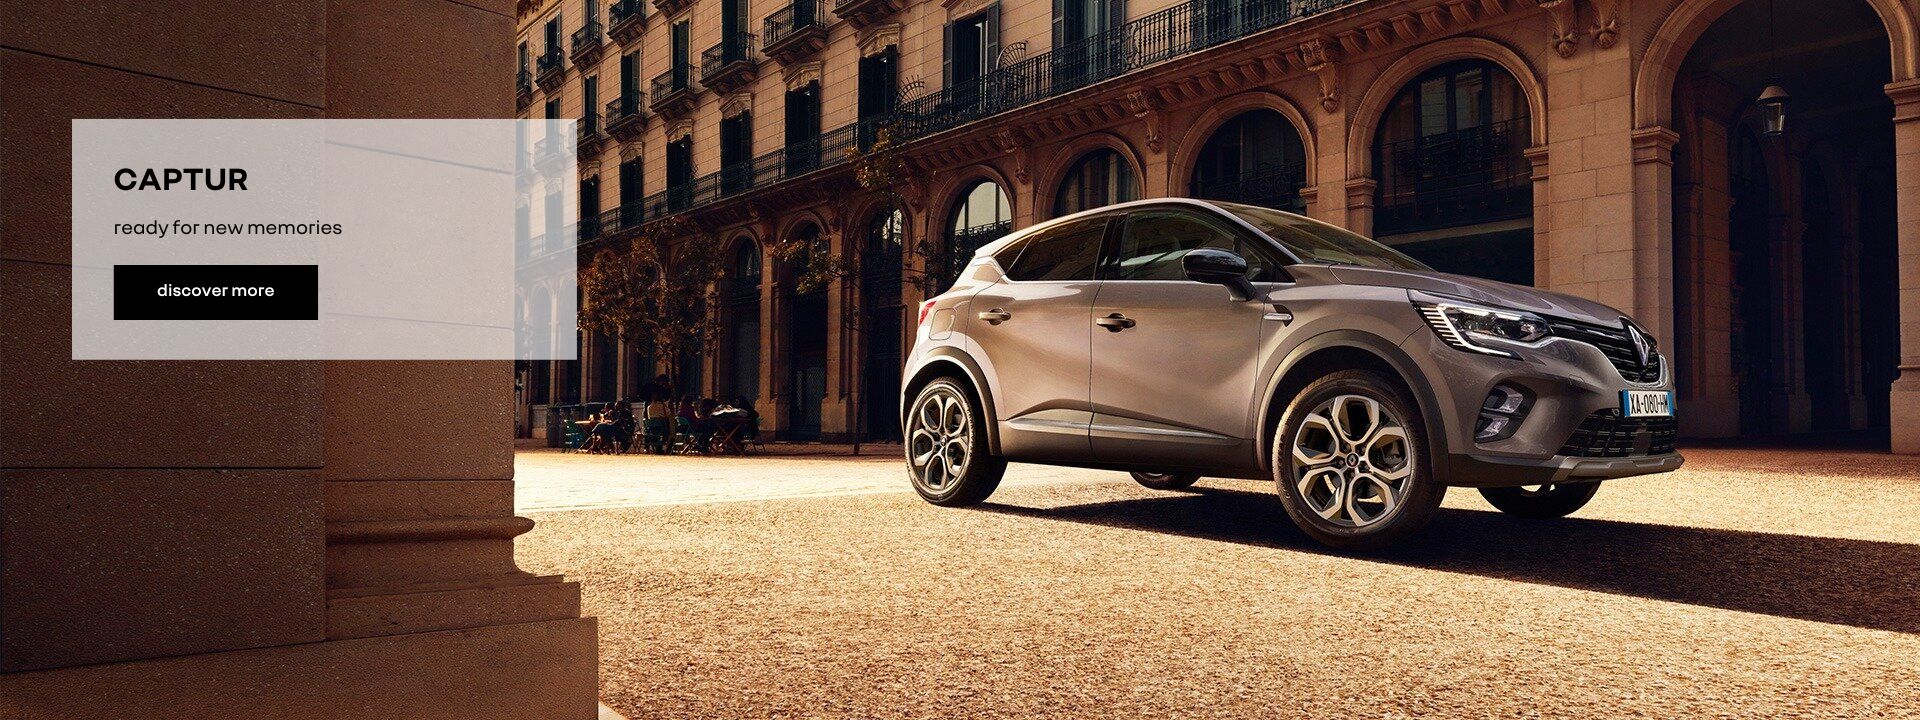 Captur. Ready for new memories. Discover more.